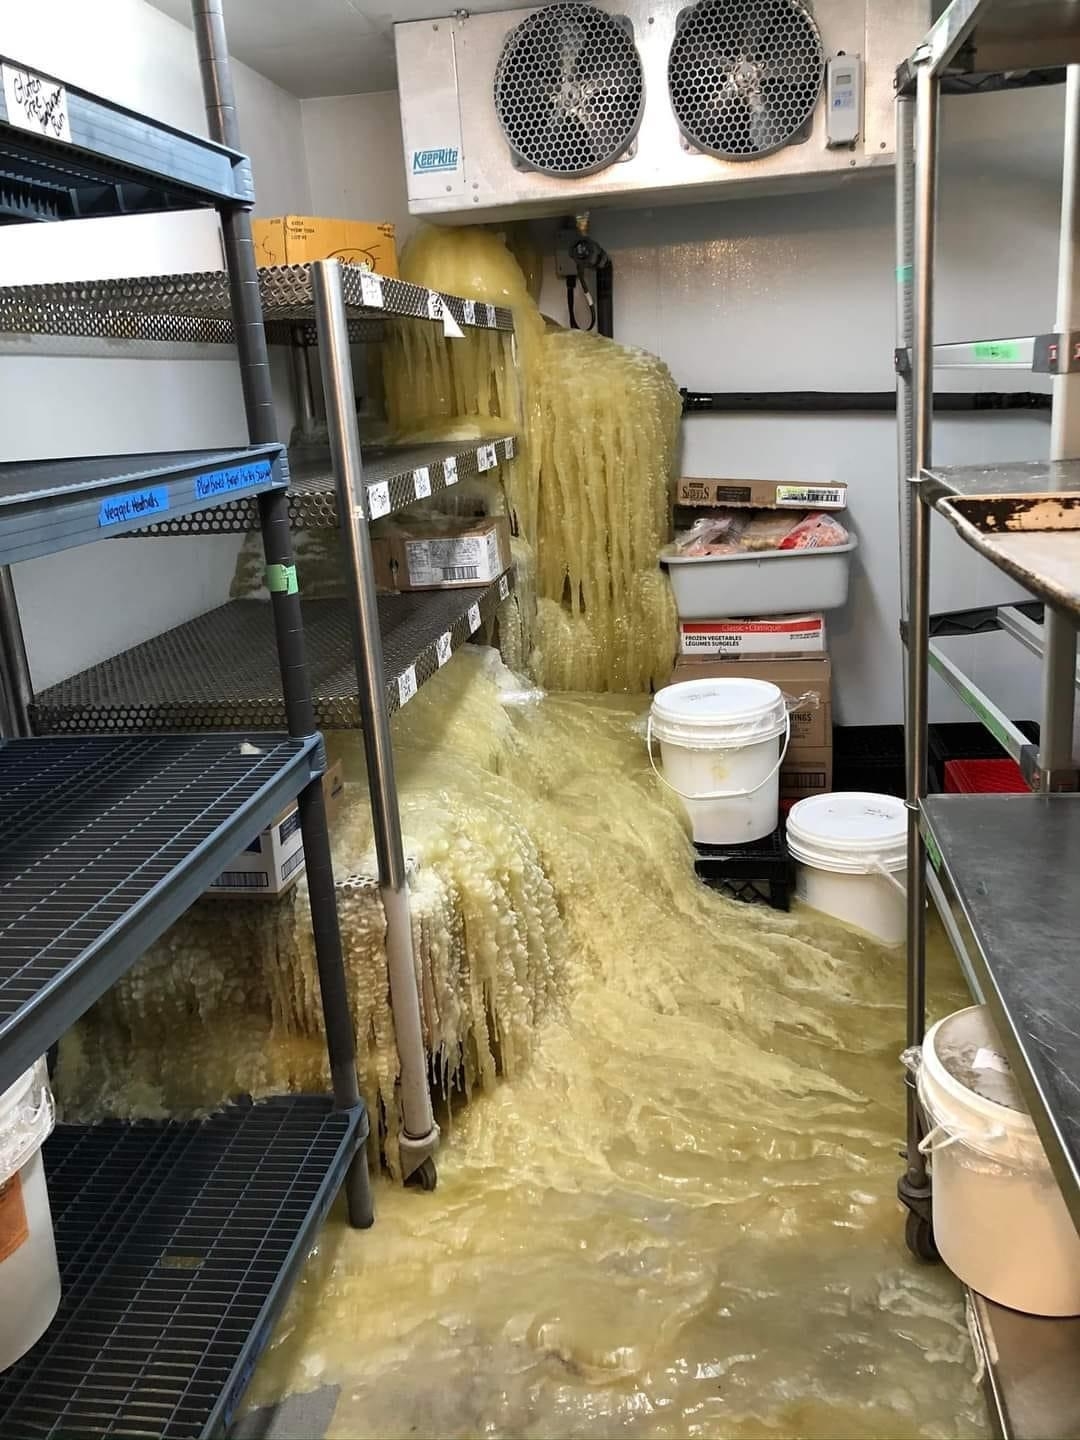 Walk-in cooler with spilled food covering the floor and shelves